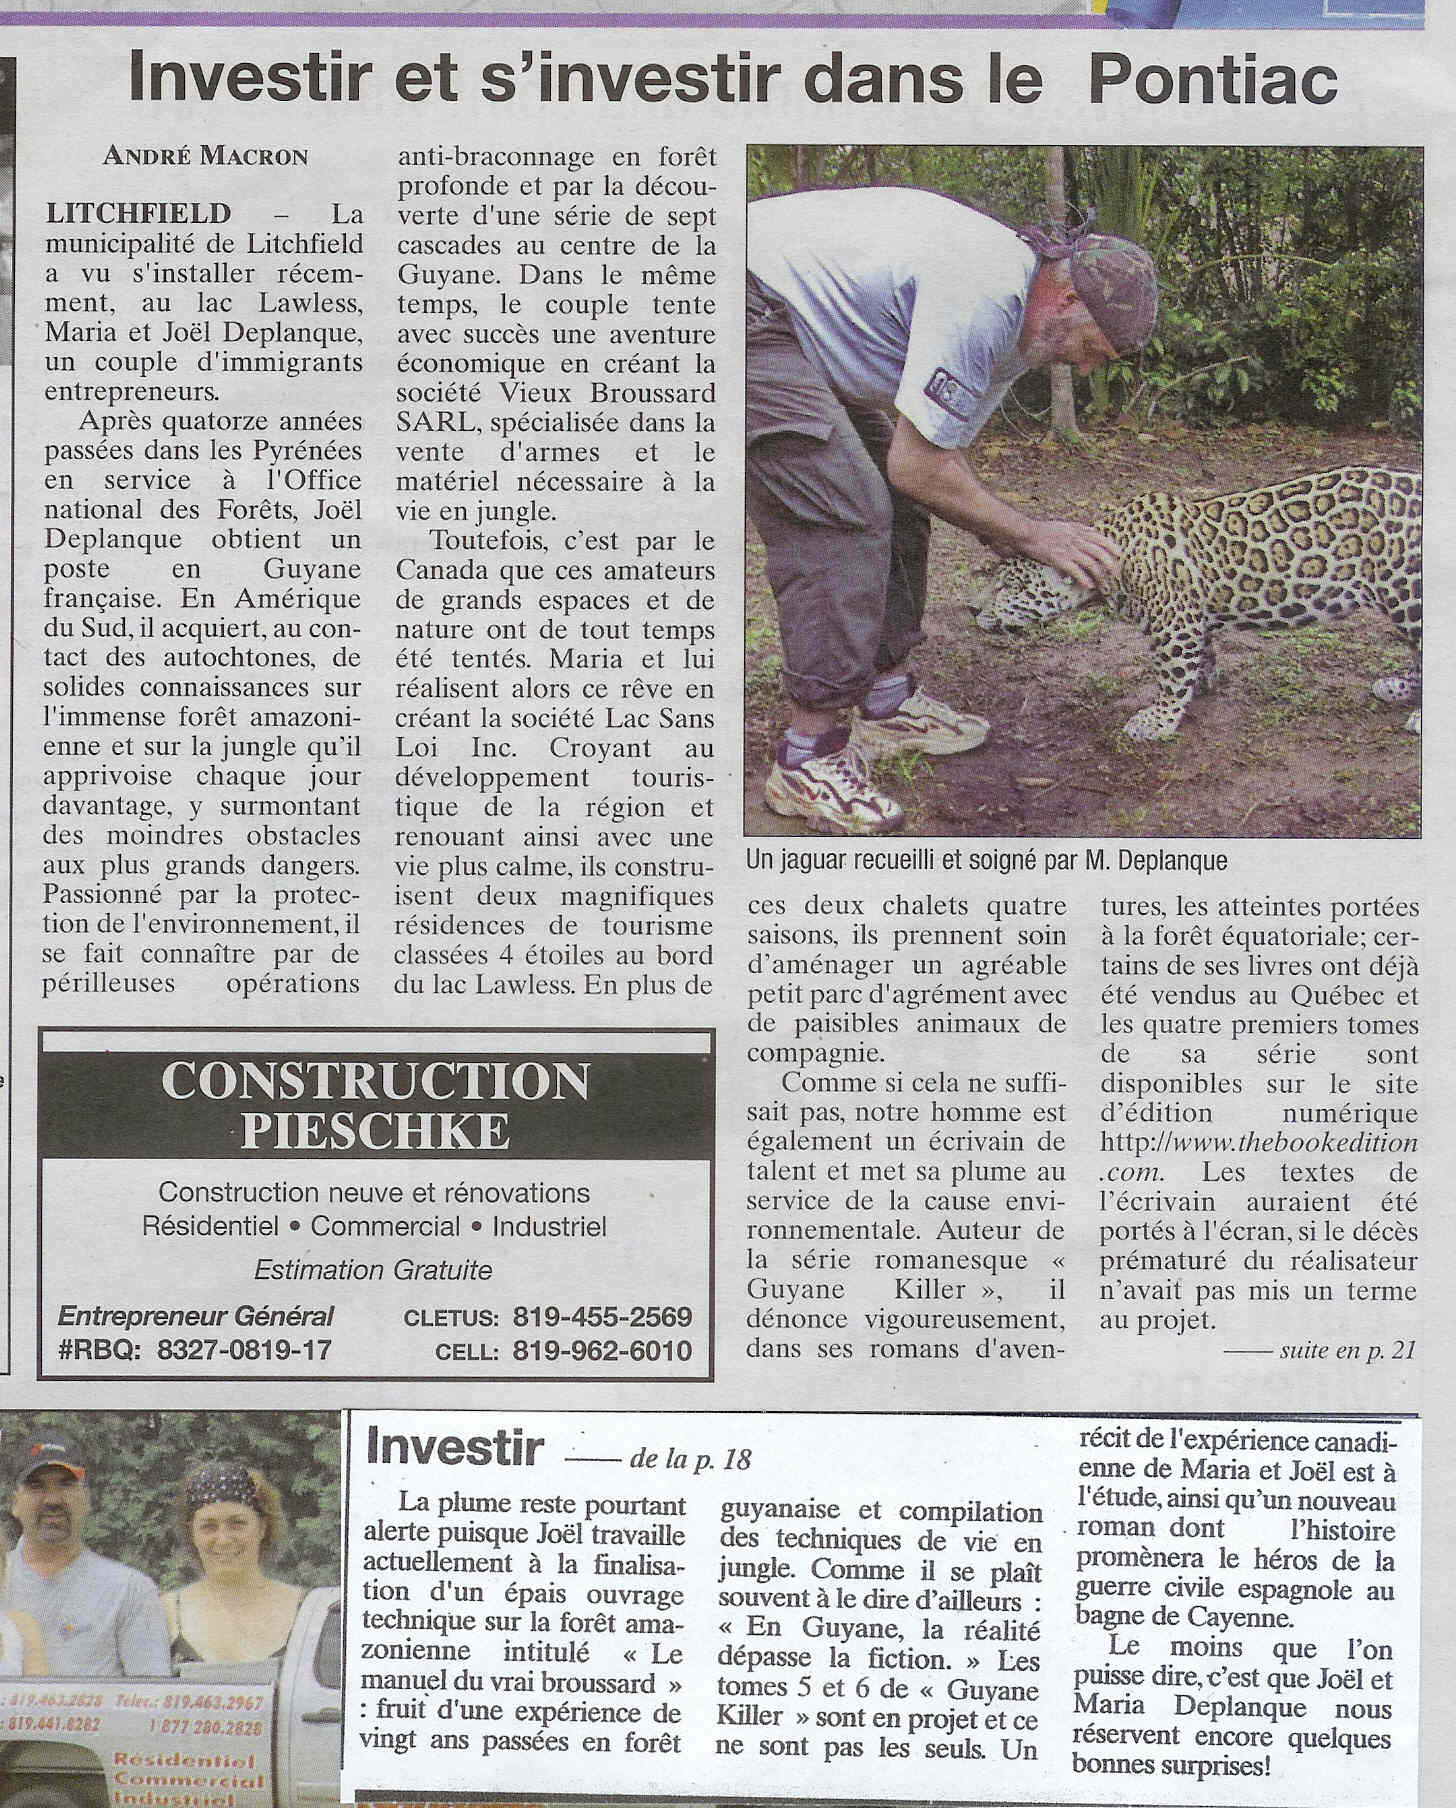 Article complet journal pontiac